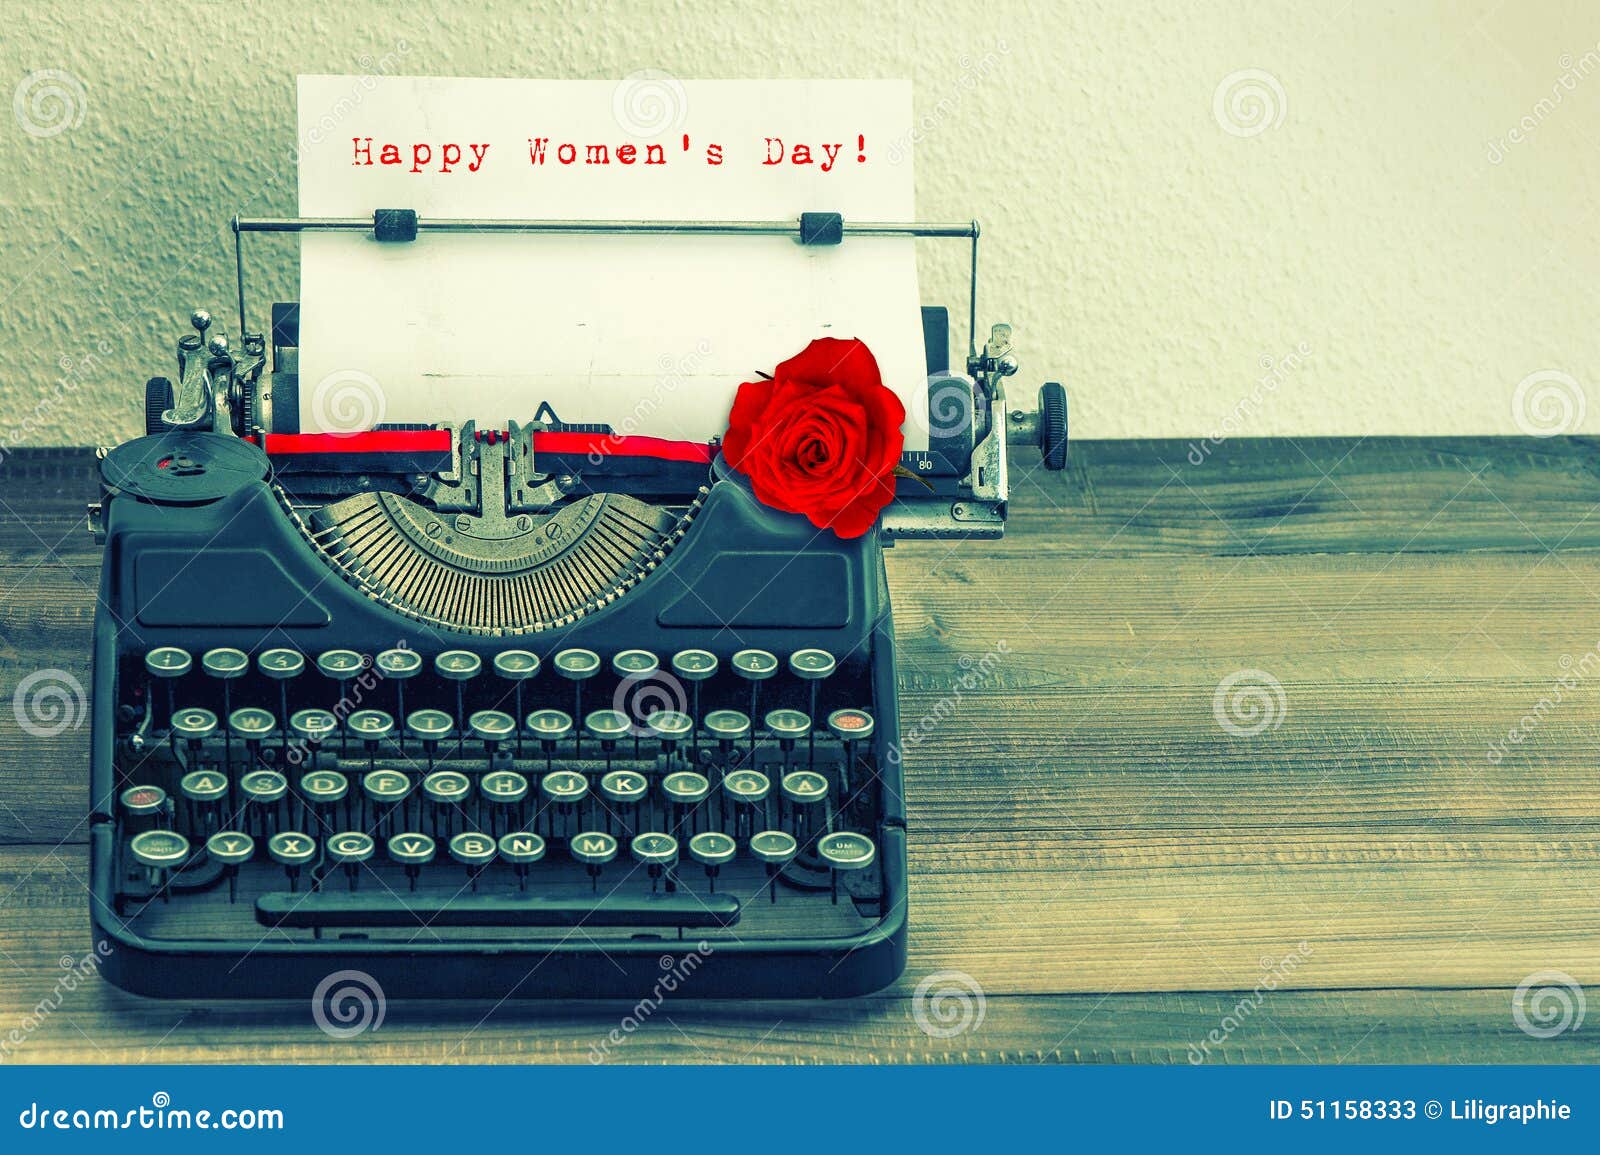 vintage typewriter with red rose flower. happy womens day